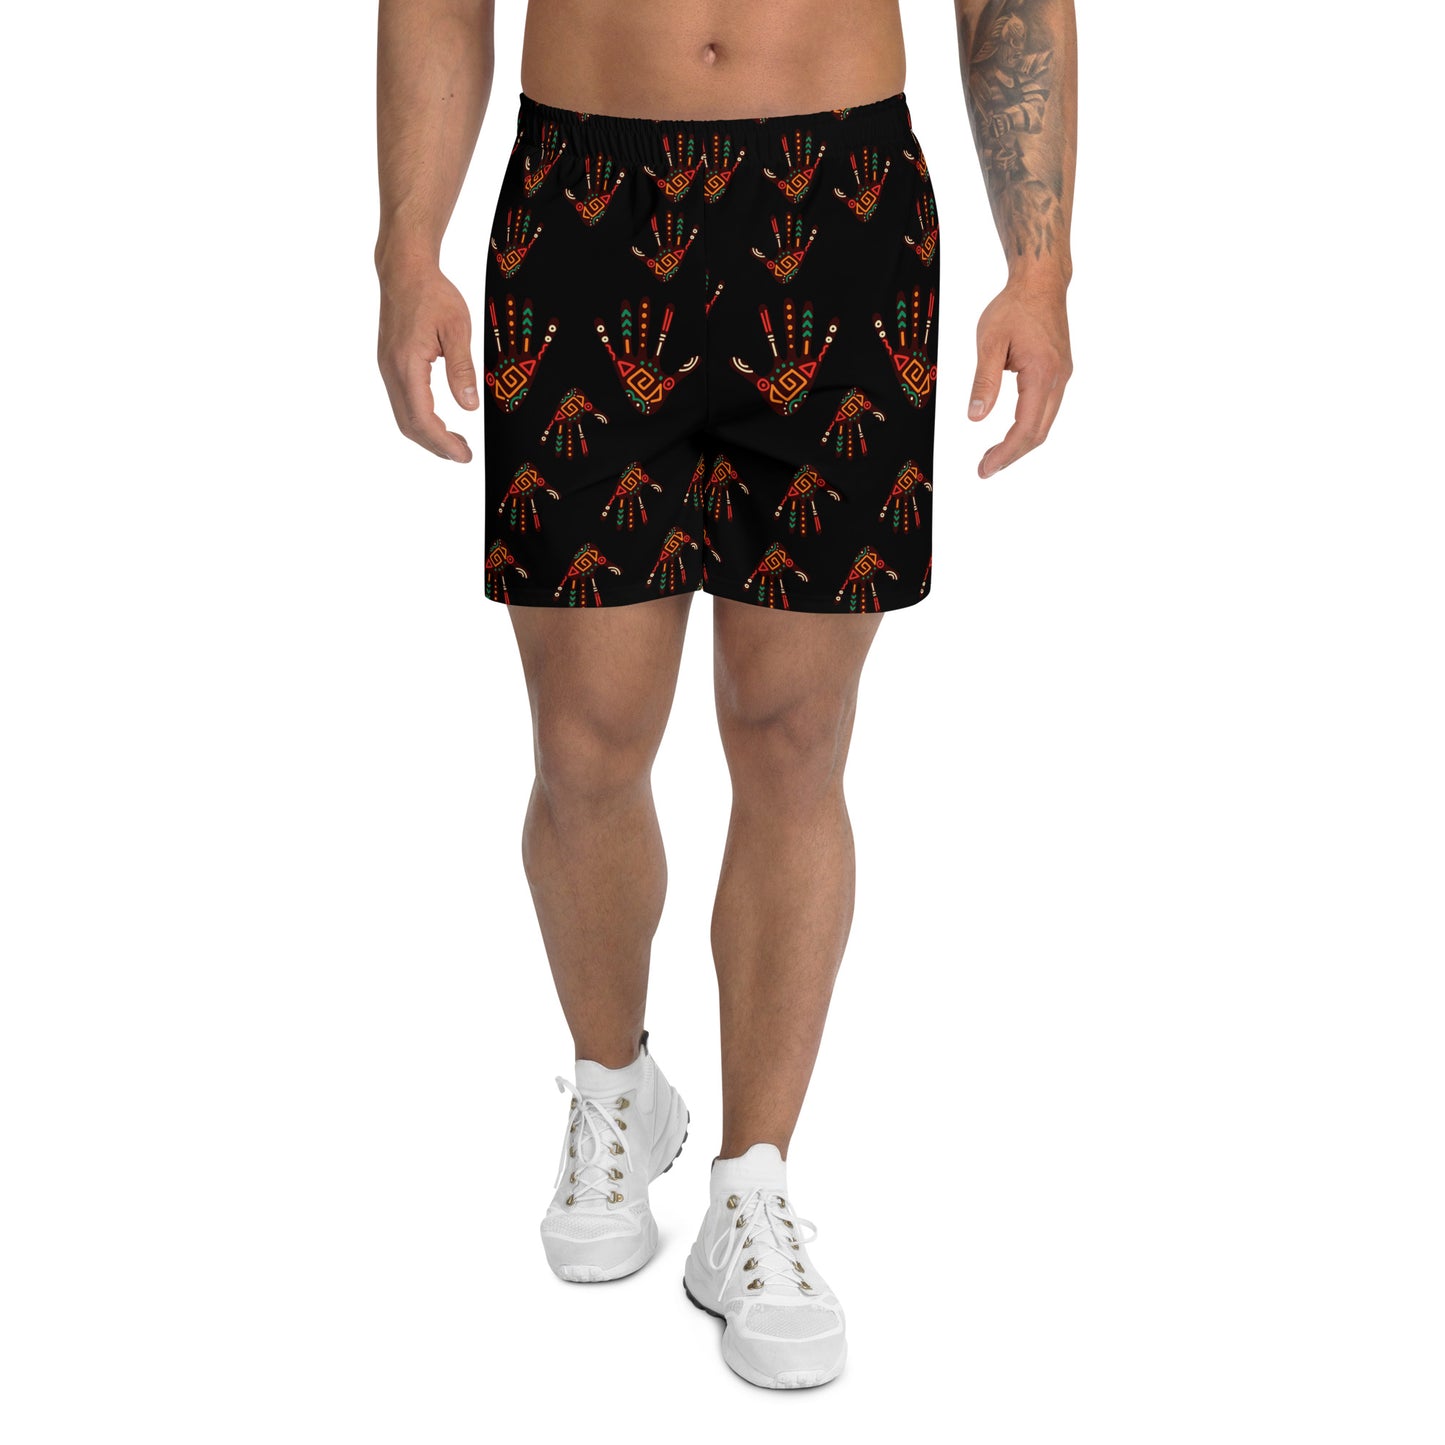 Duro Tribal Palm Print Men's Recycled Athletic Shorts